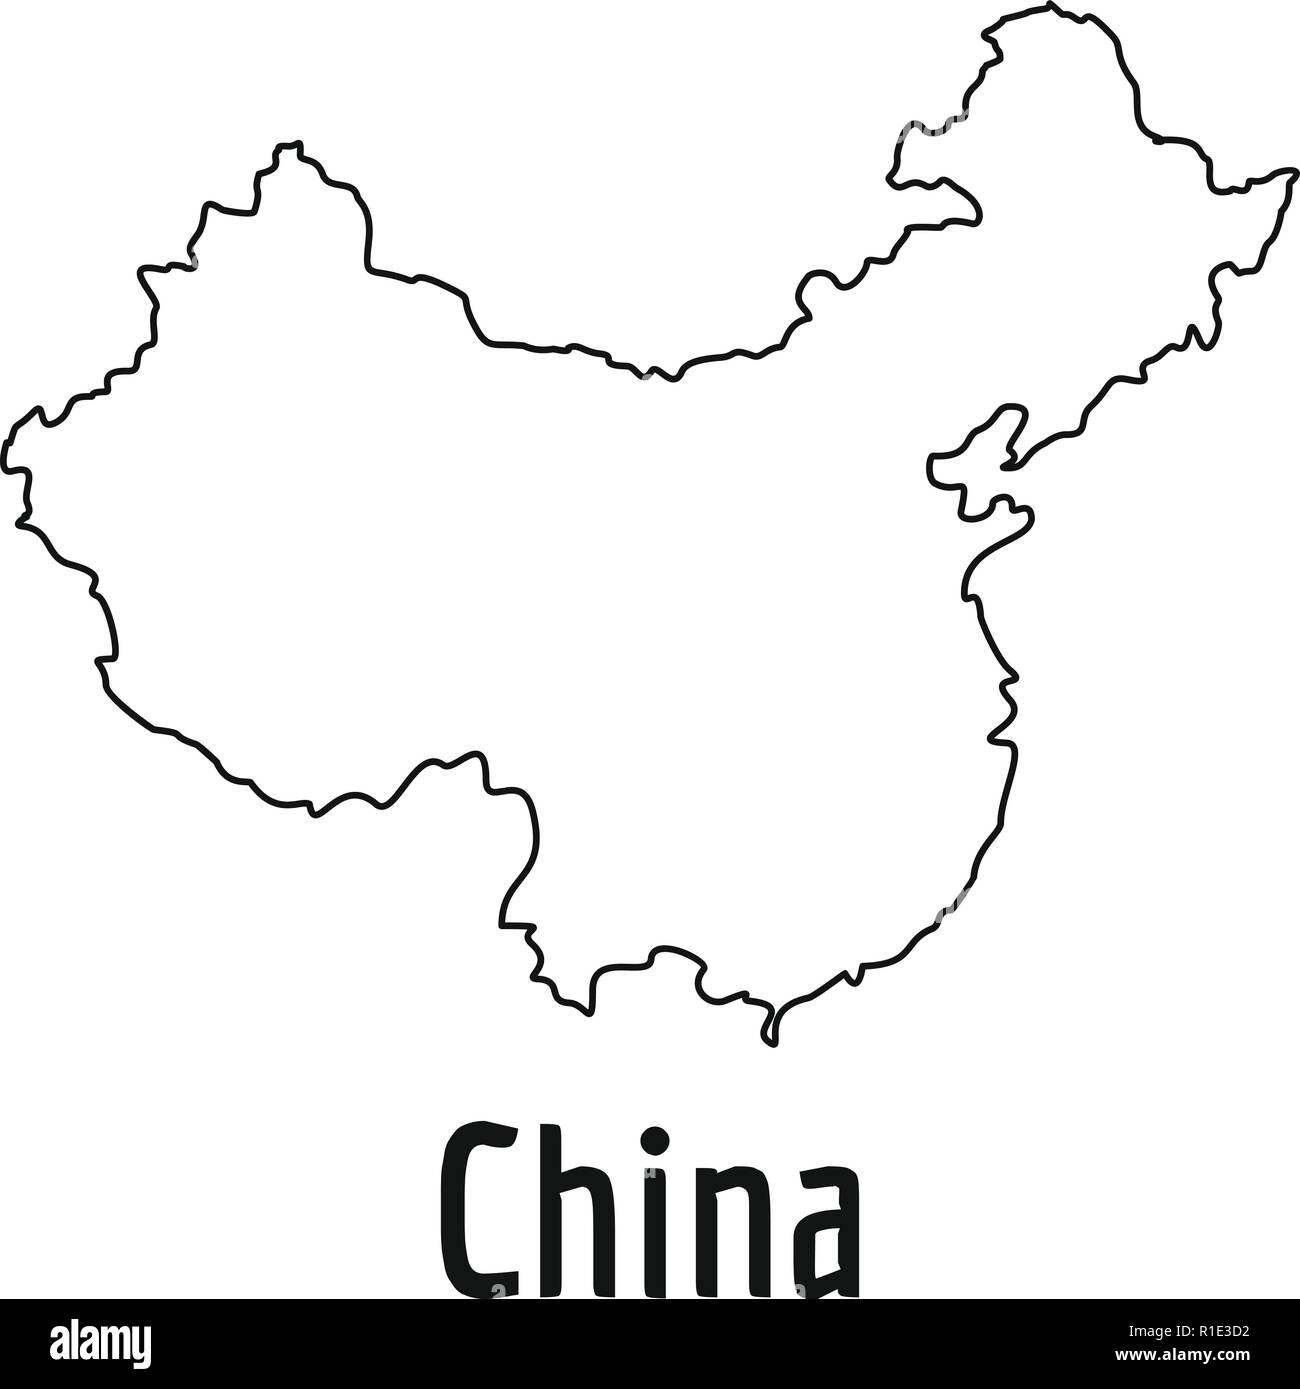 China Map Black And White Stock Photos Images Alamy